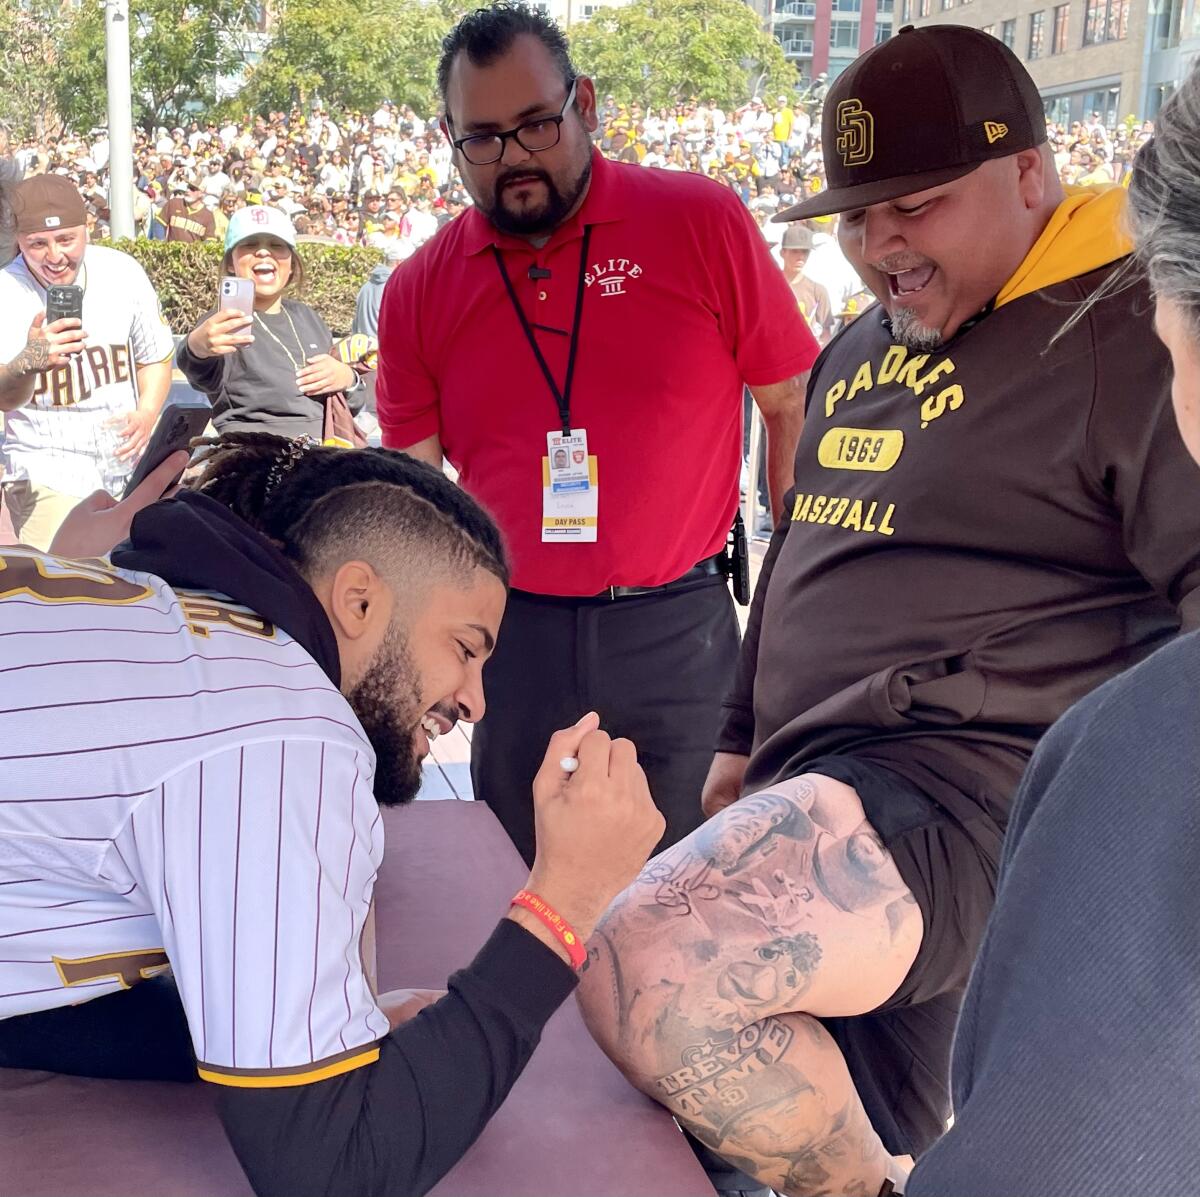 Padres FanFest  What you need to know, parking, trolley tips